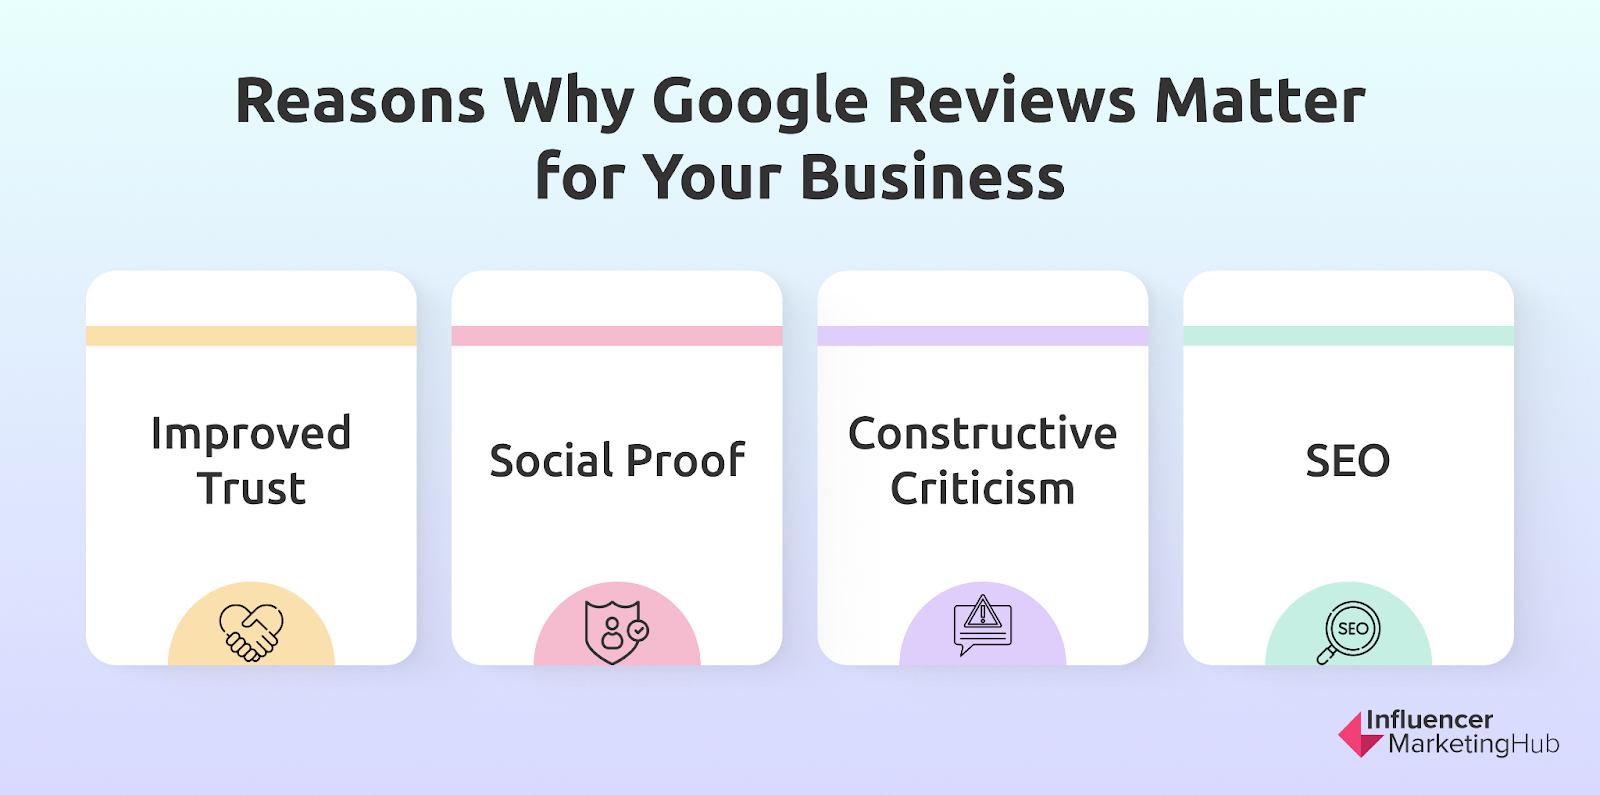 Why Google Reviews Matter For a Business